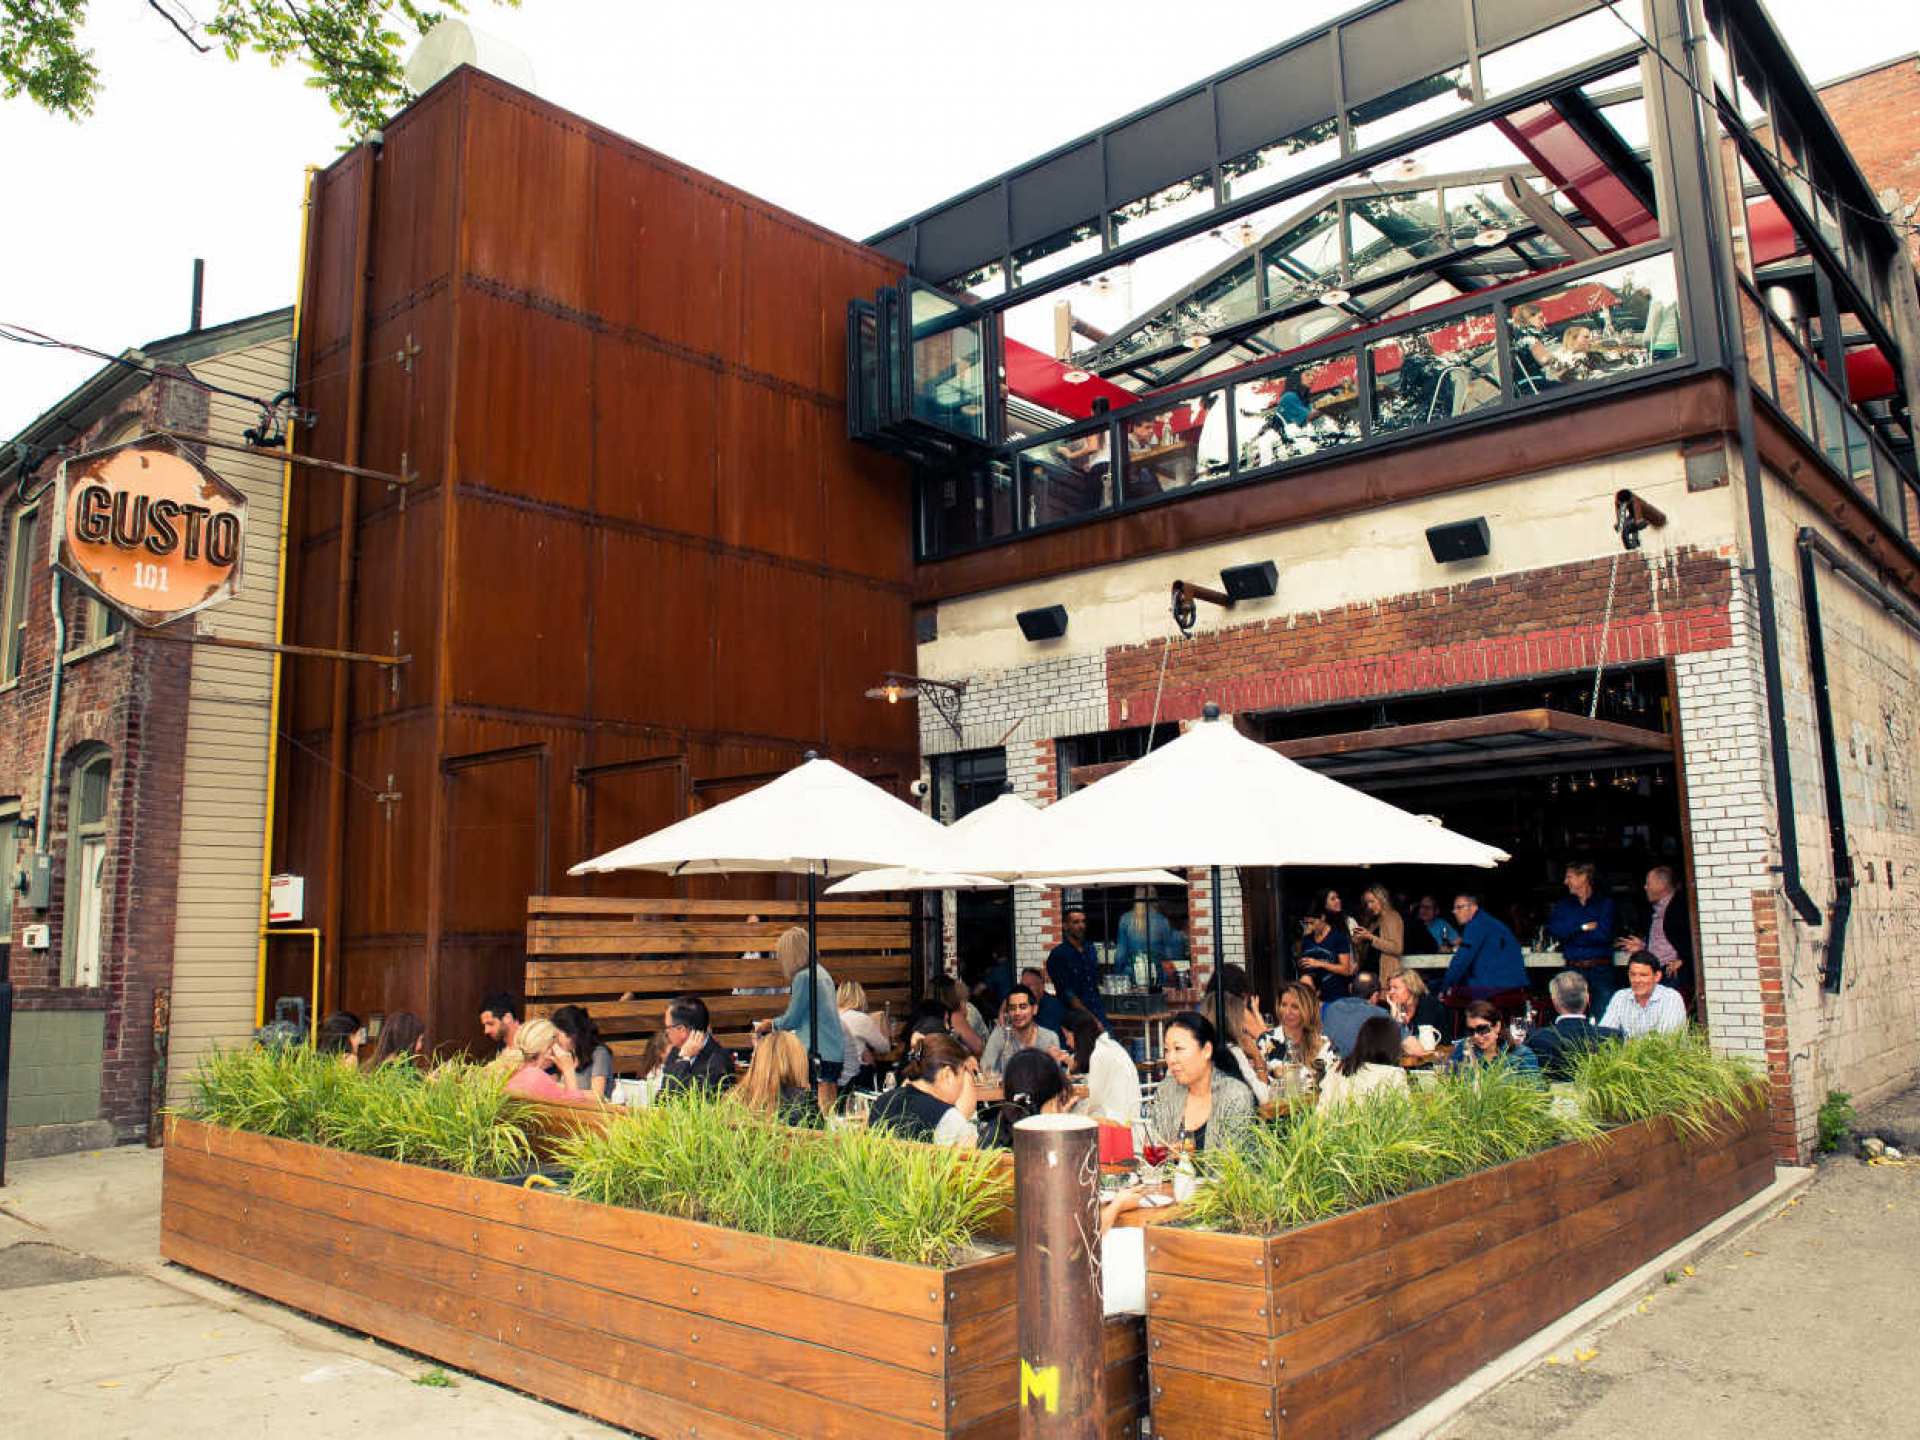 Best patios in Toronto | Gusto 101's street-side patio and rooftop patio